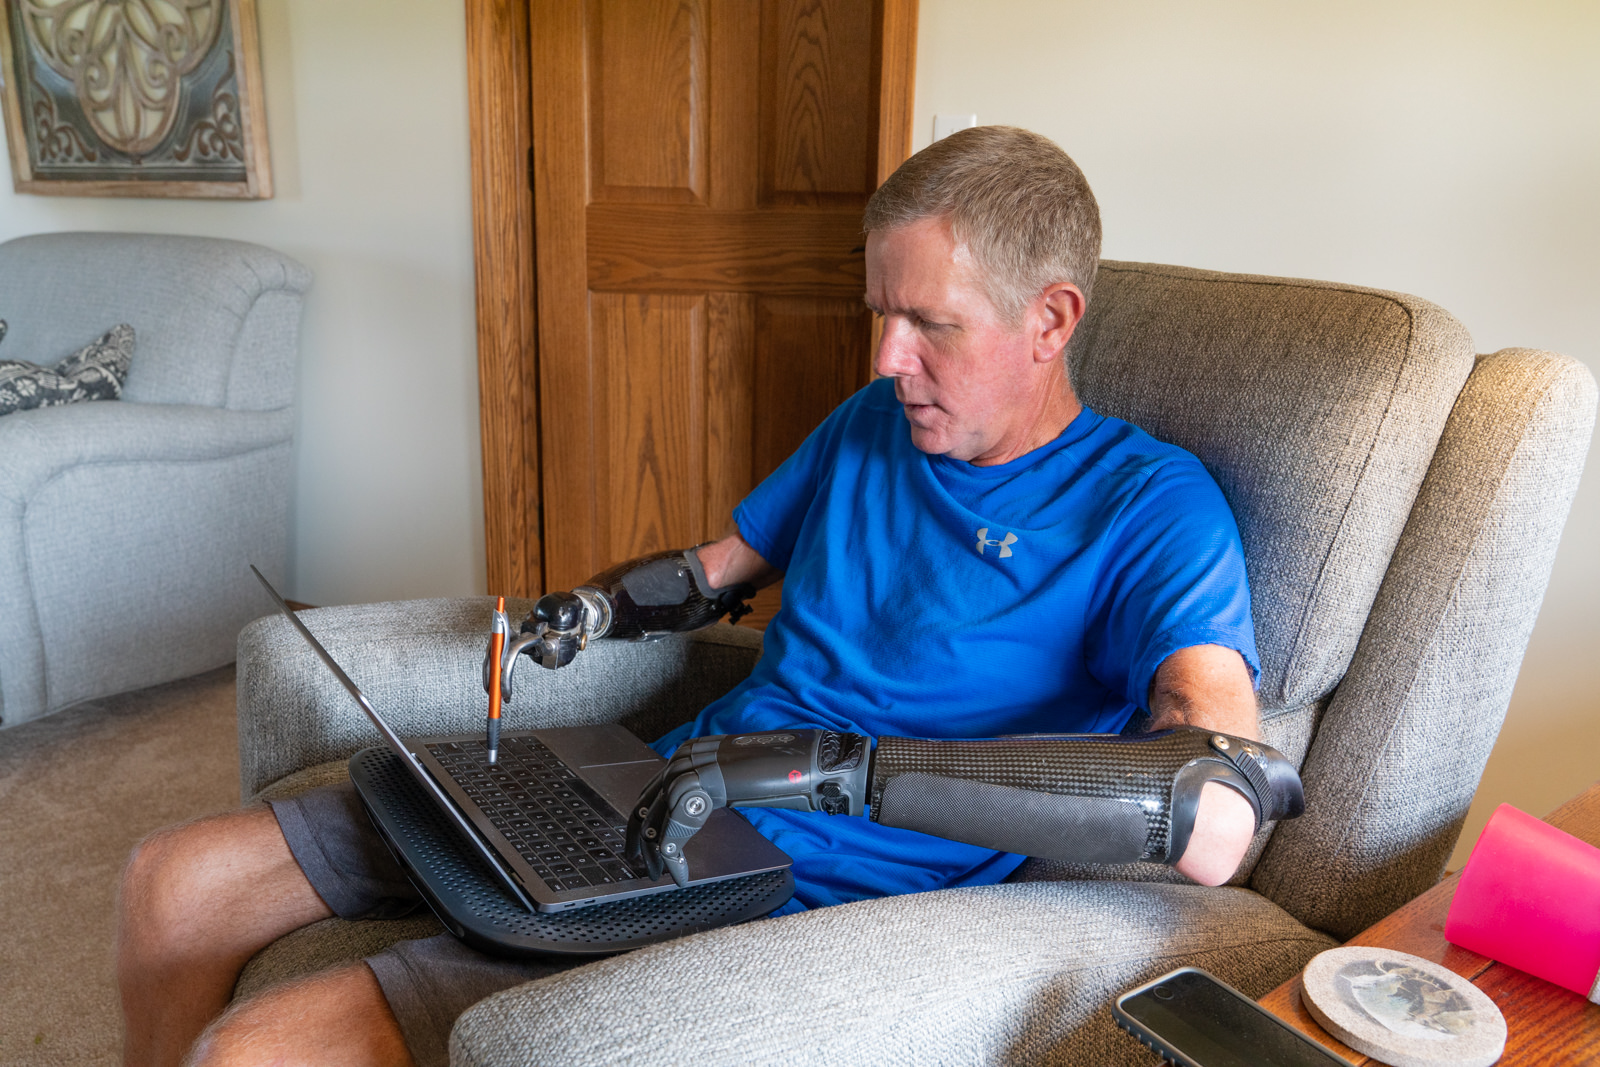 Life Hacks for People with an Upper Limb Difference